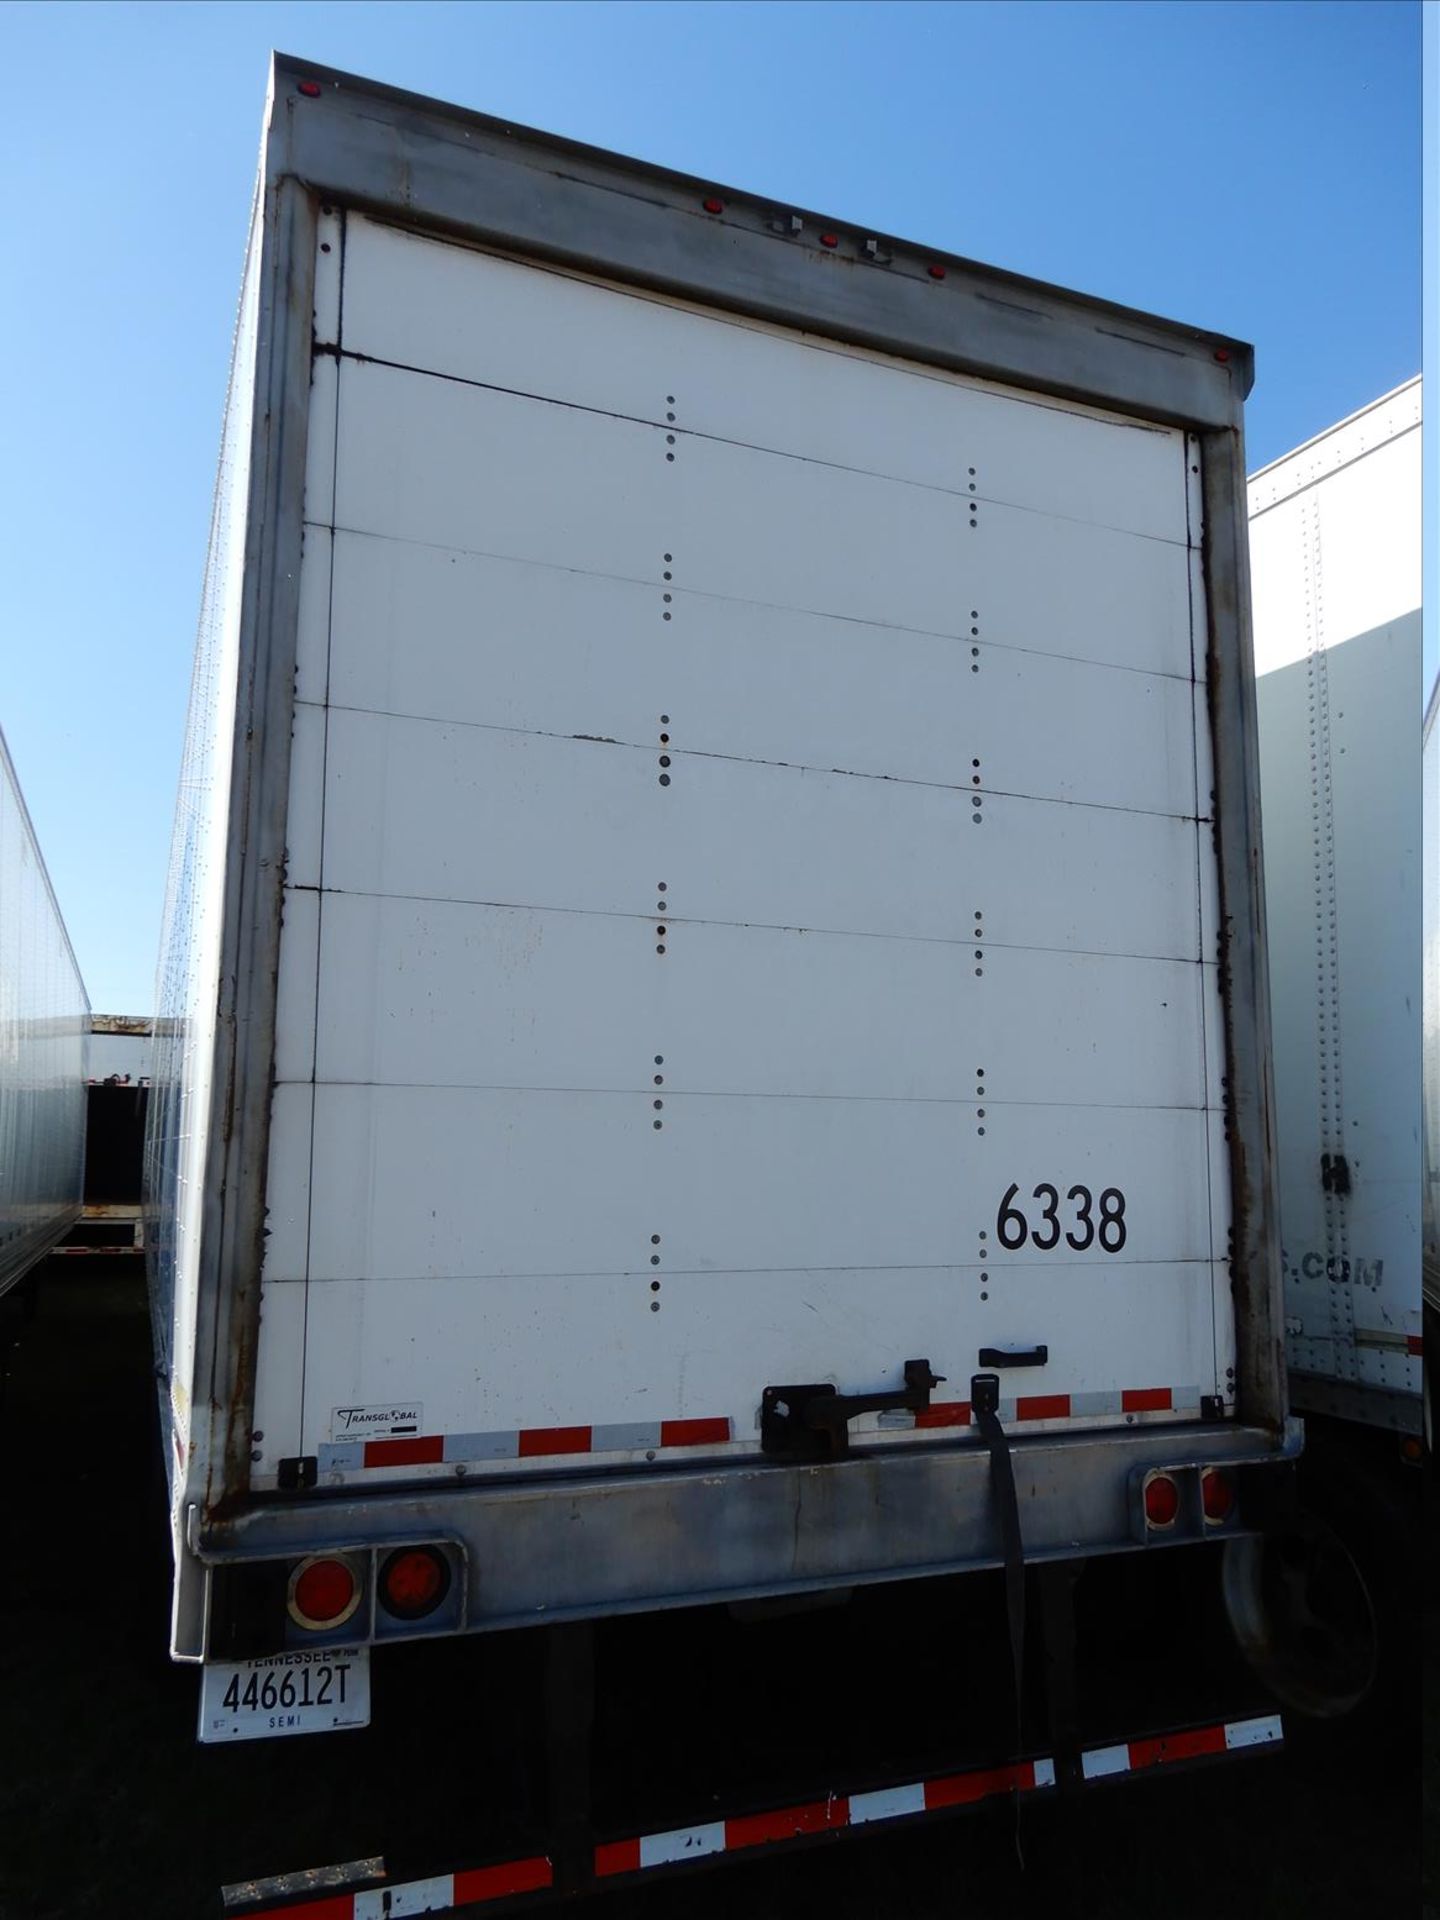 2014 Utility Trailer - Located in Indianapolis, IN - Image 16 of 27